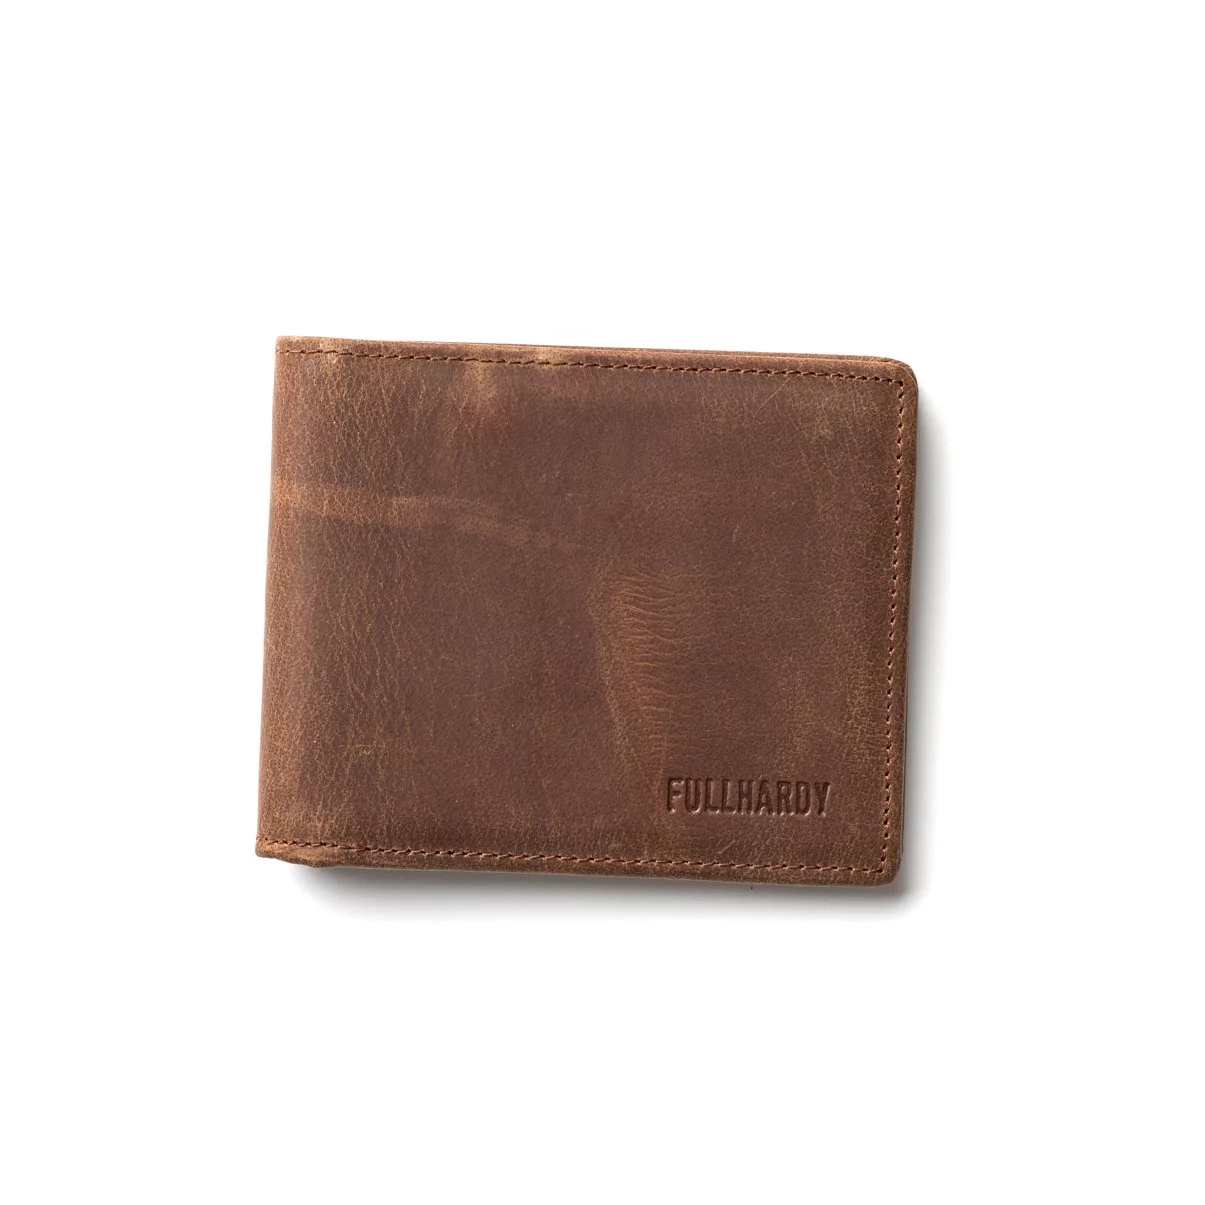 Portefeuille Fullhardy Brown D8028 (Brown)